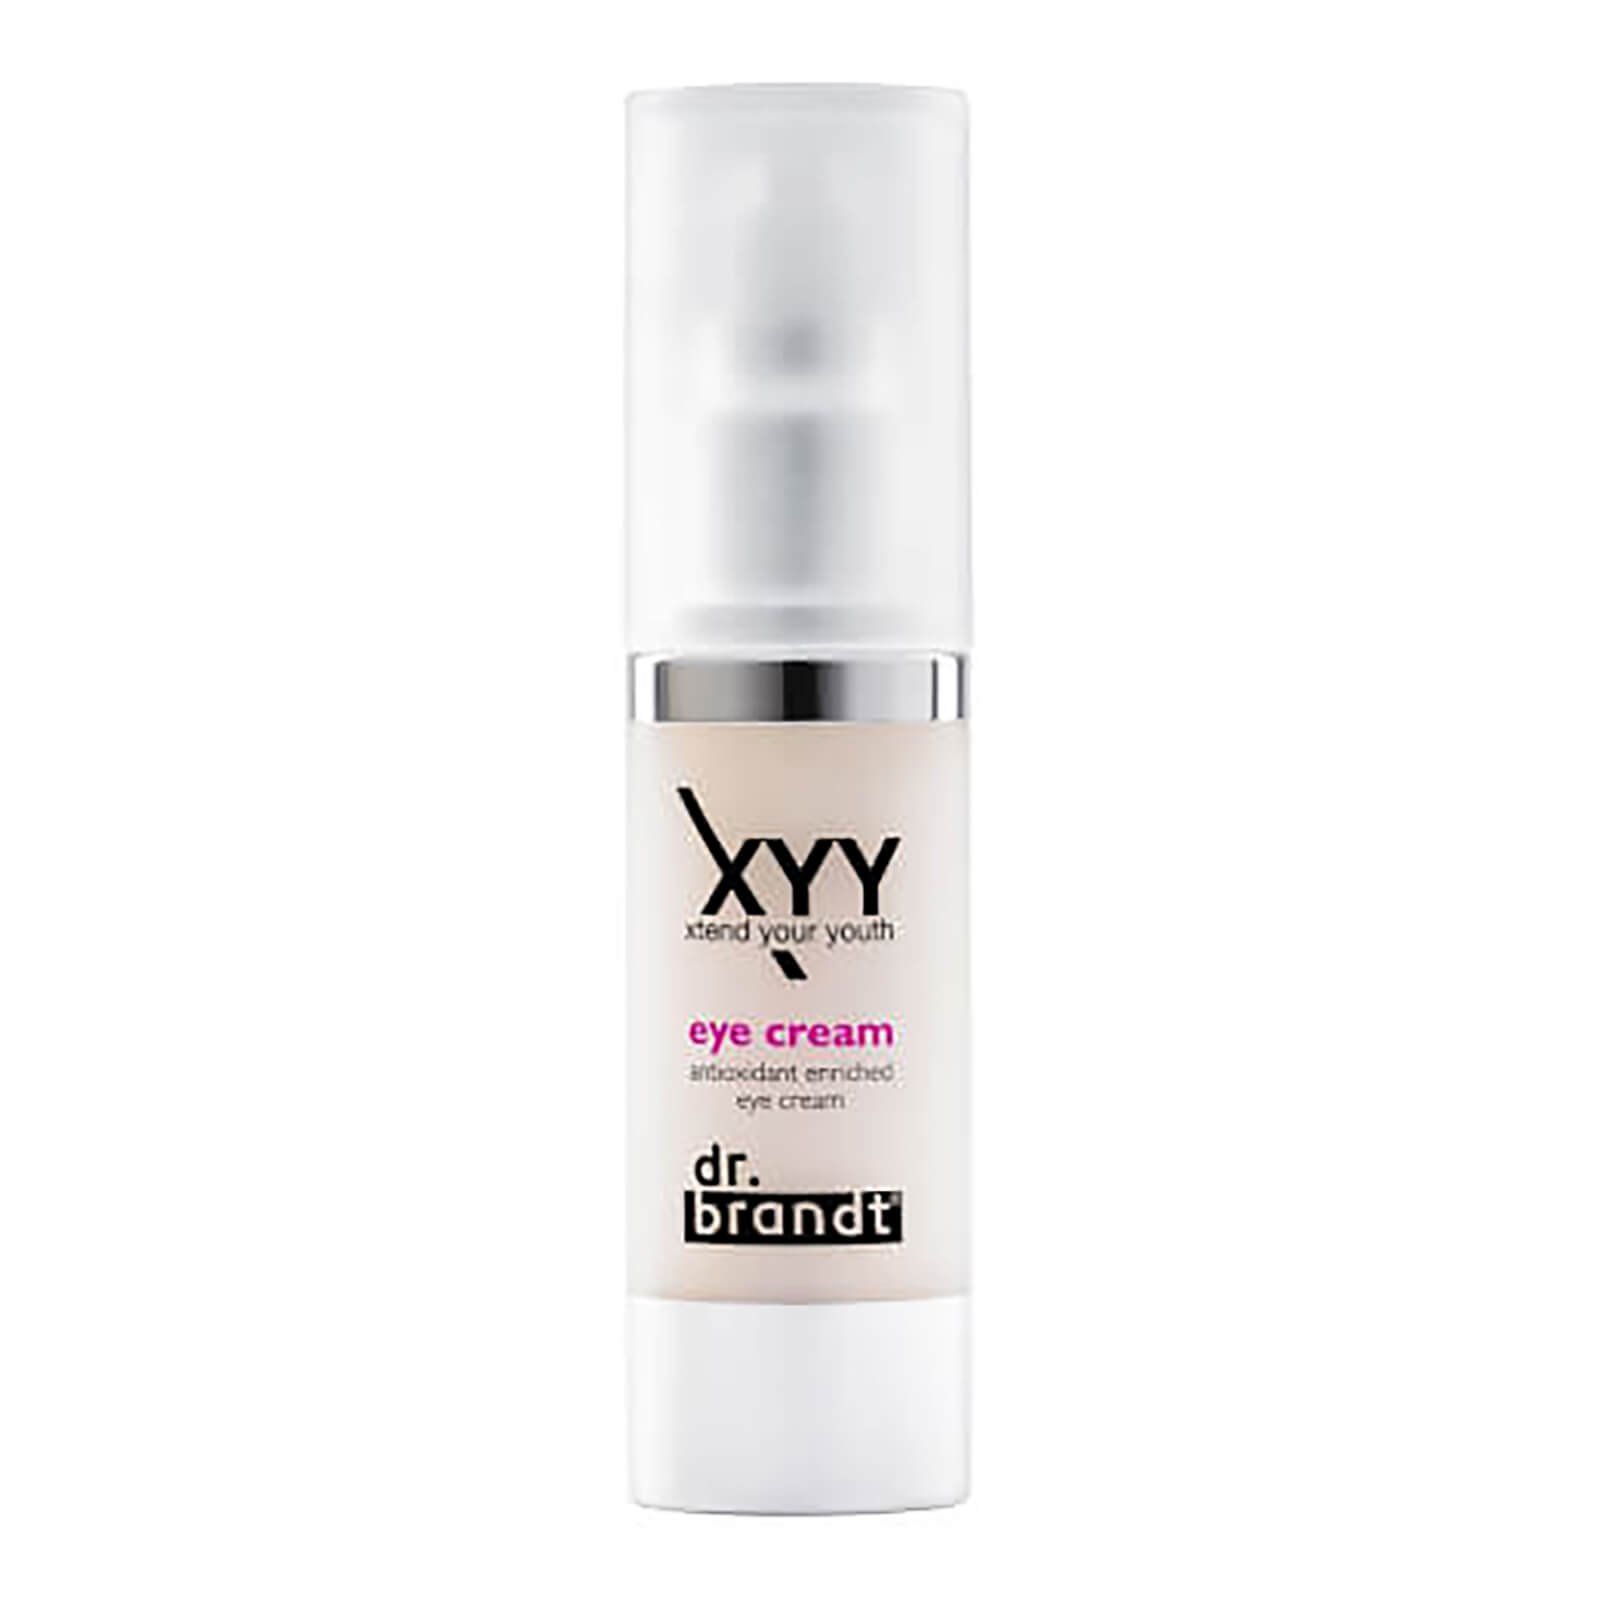 Crema para Ojos Dr Brandt Xtend Your Youth (15g)